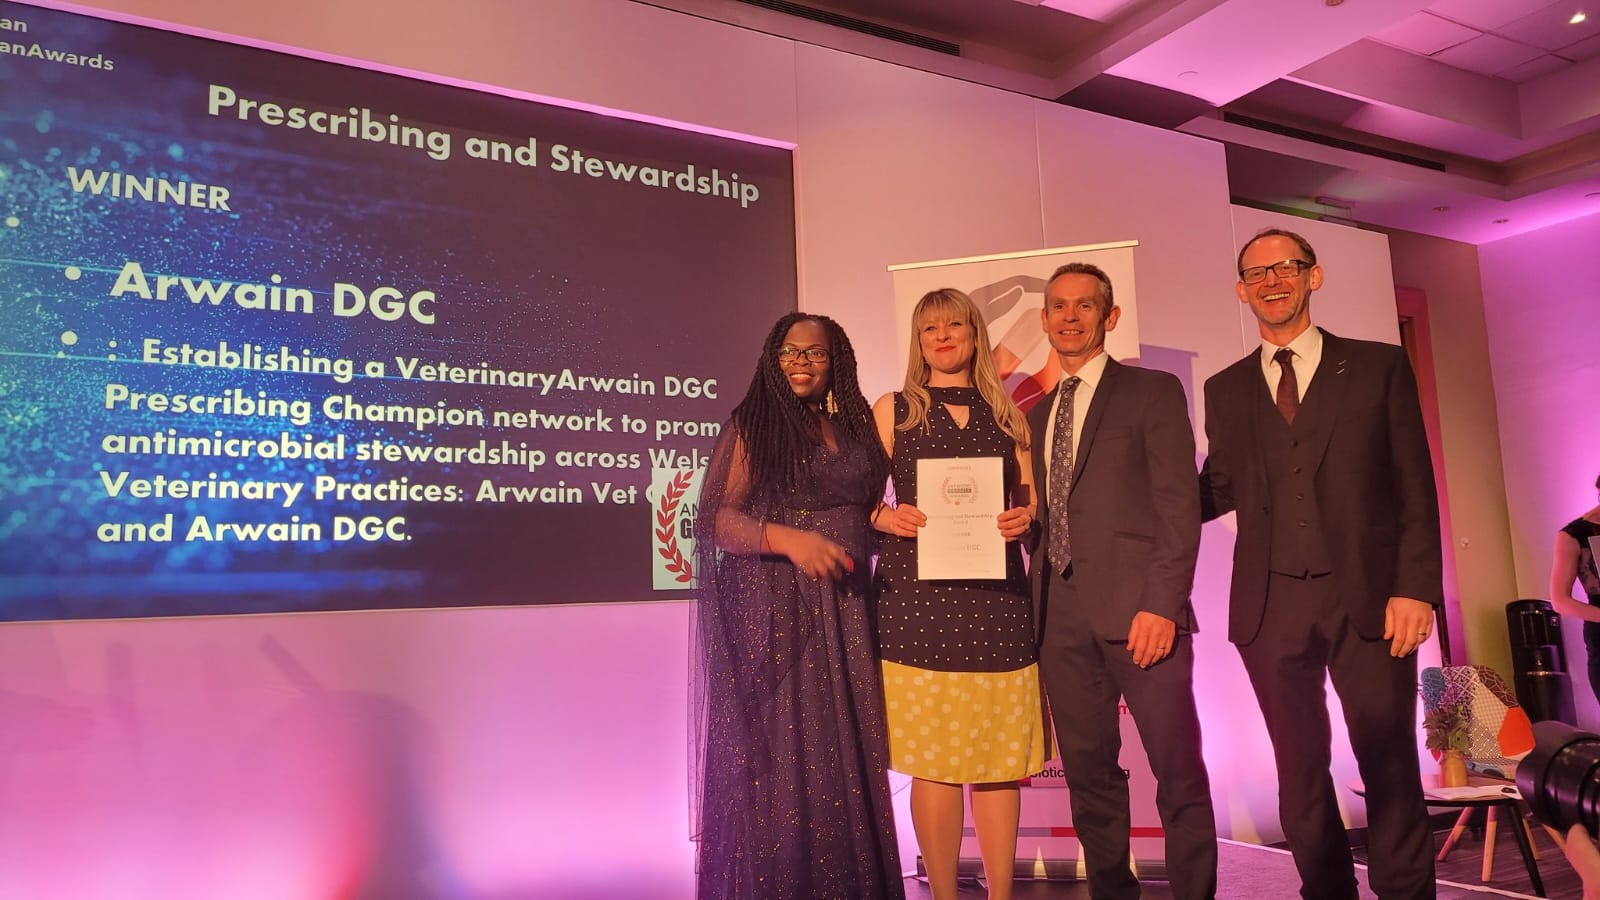 (left to right) Diane Ashiru-Oredope (Lead for AG, Chair of ESPAUR, Lead Pharmacist, UKHSA), Dr Gwen Rees BVSc (Hons) PhD MRCVS Lecturer in Veterinary Science at Aberystwyth University, Arwain DGC Programme Manager Dewi Hughes, and Wales Chief Veterinary Officer Dr Richard Irvine.